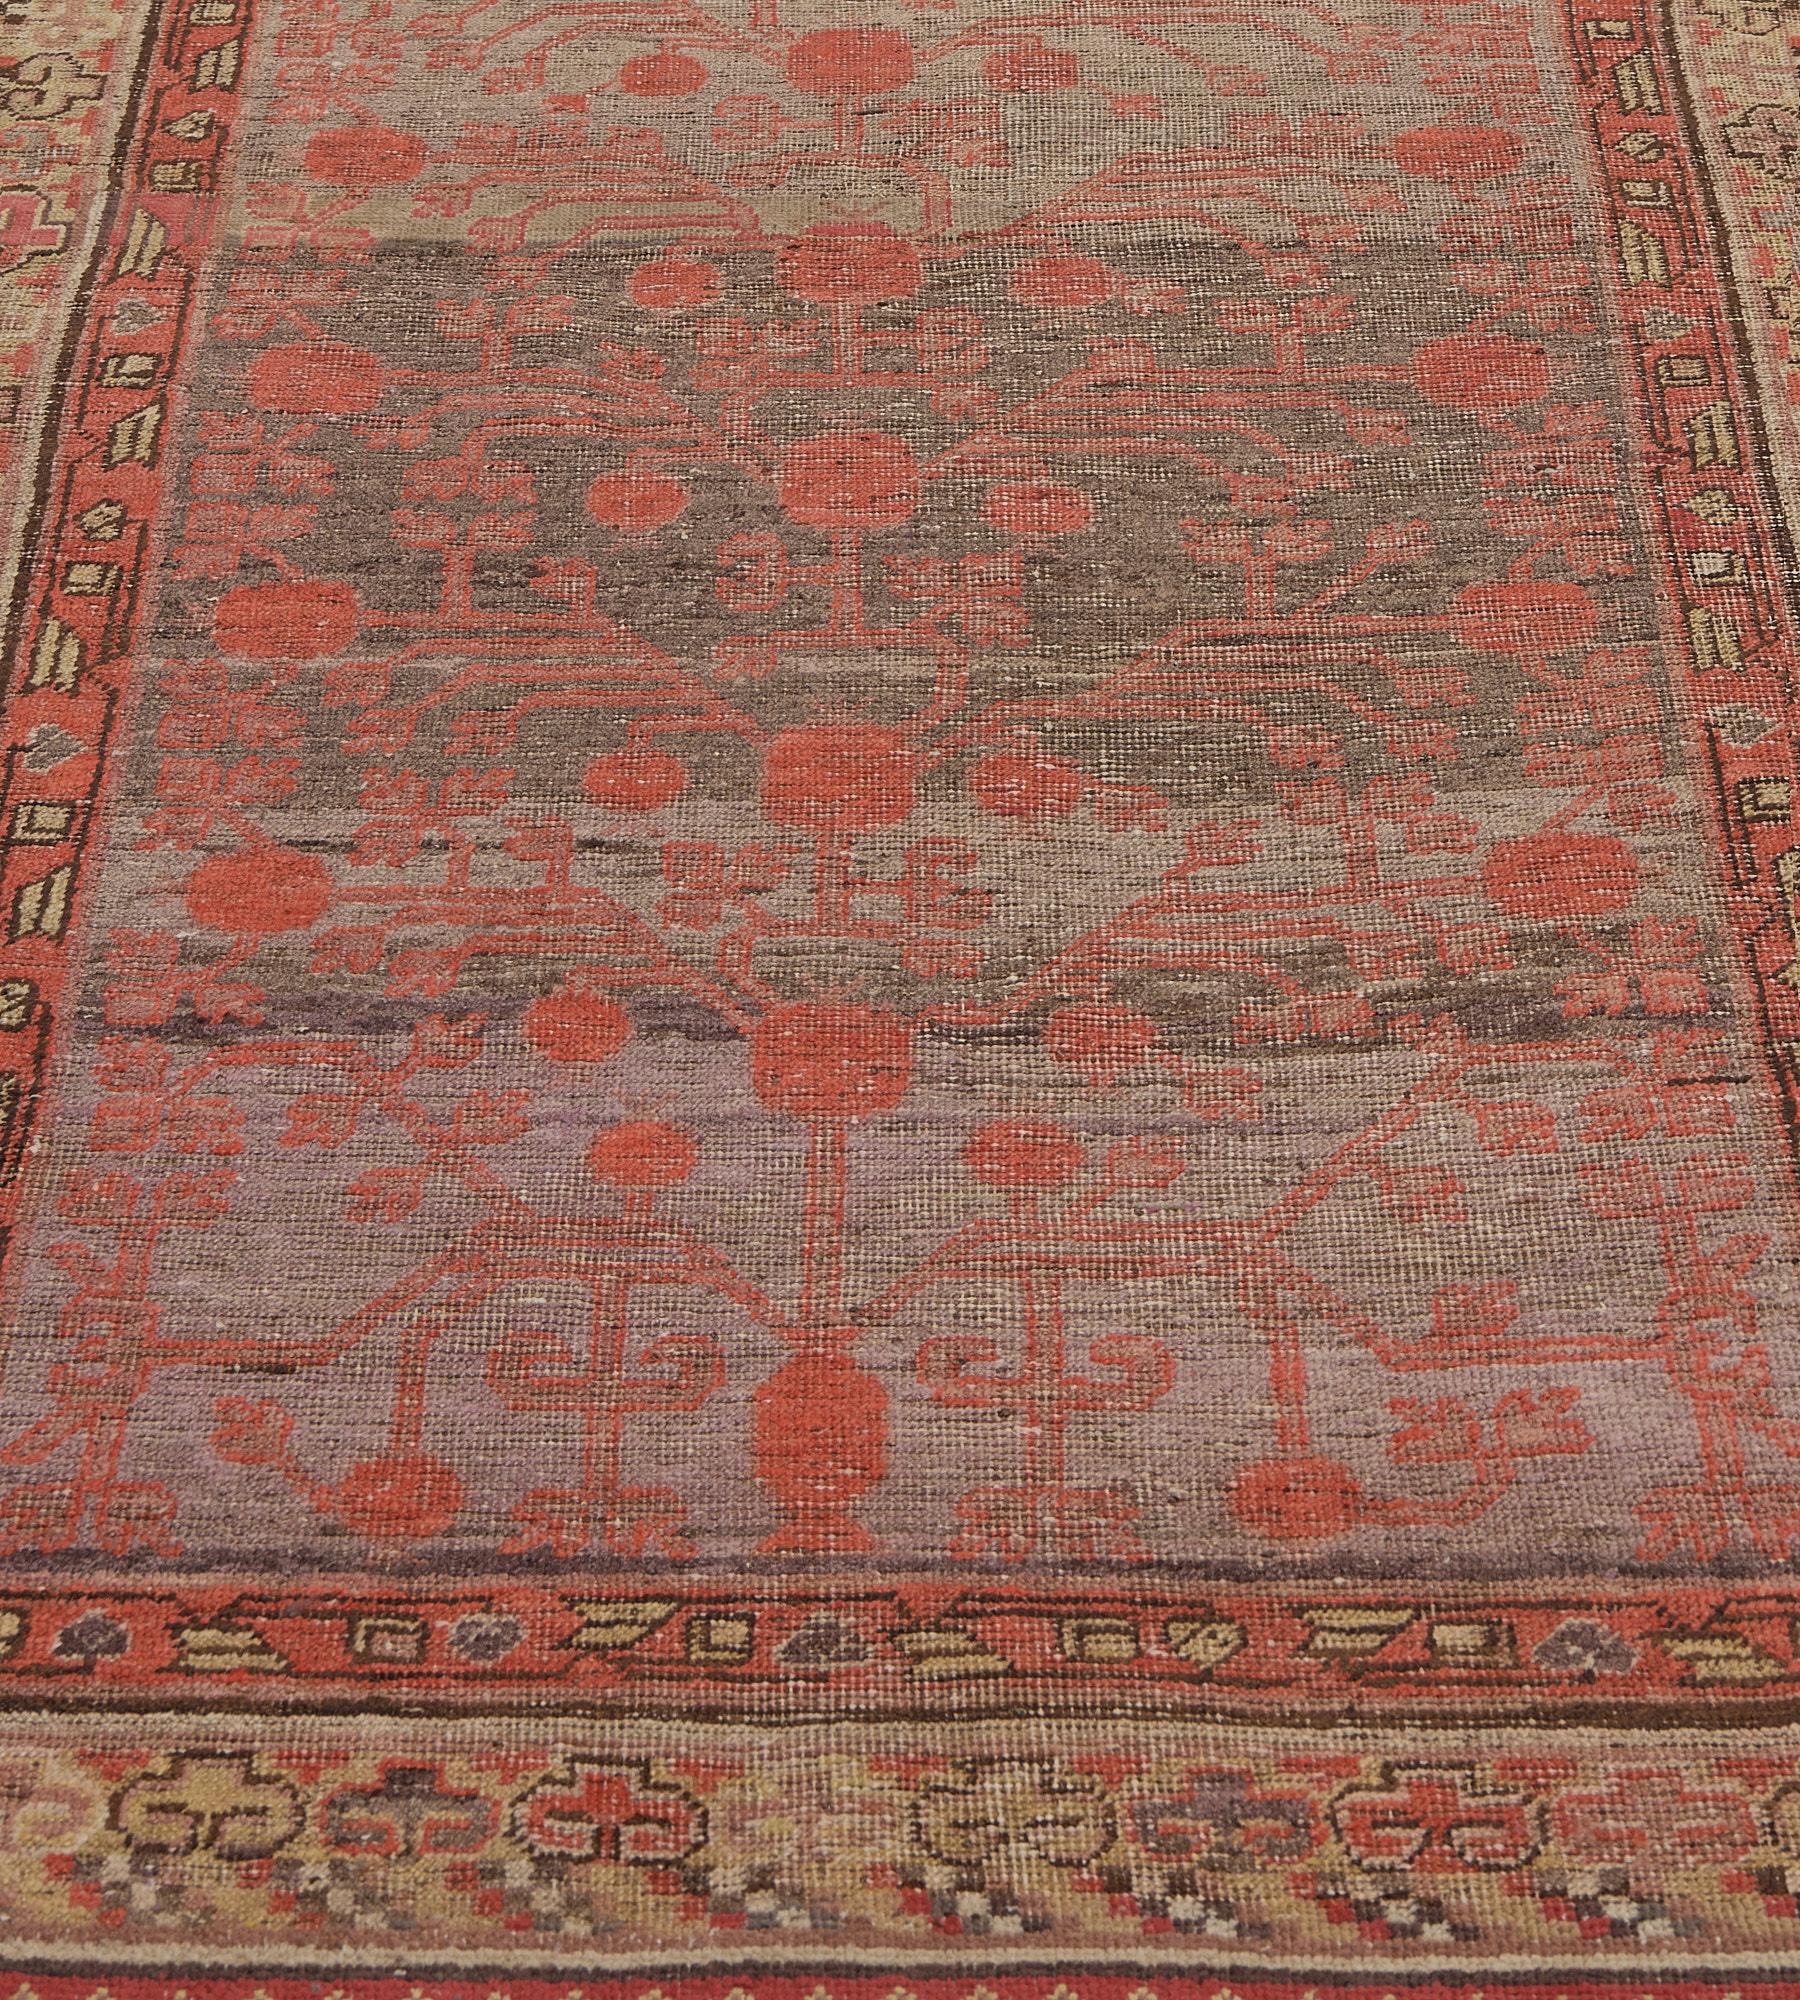 This antique, circa 1900, Khotan runner has a buff-brown and shaded aubergine-purple field with an overall delicate shaded terracotta-pink pomegranate vine, in a broad cloud motif border with diagonal striped polychrome wind motifs between shaded